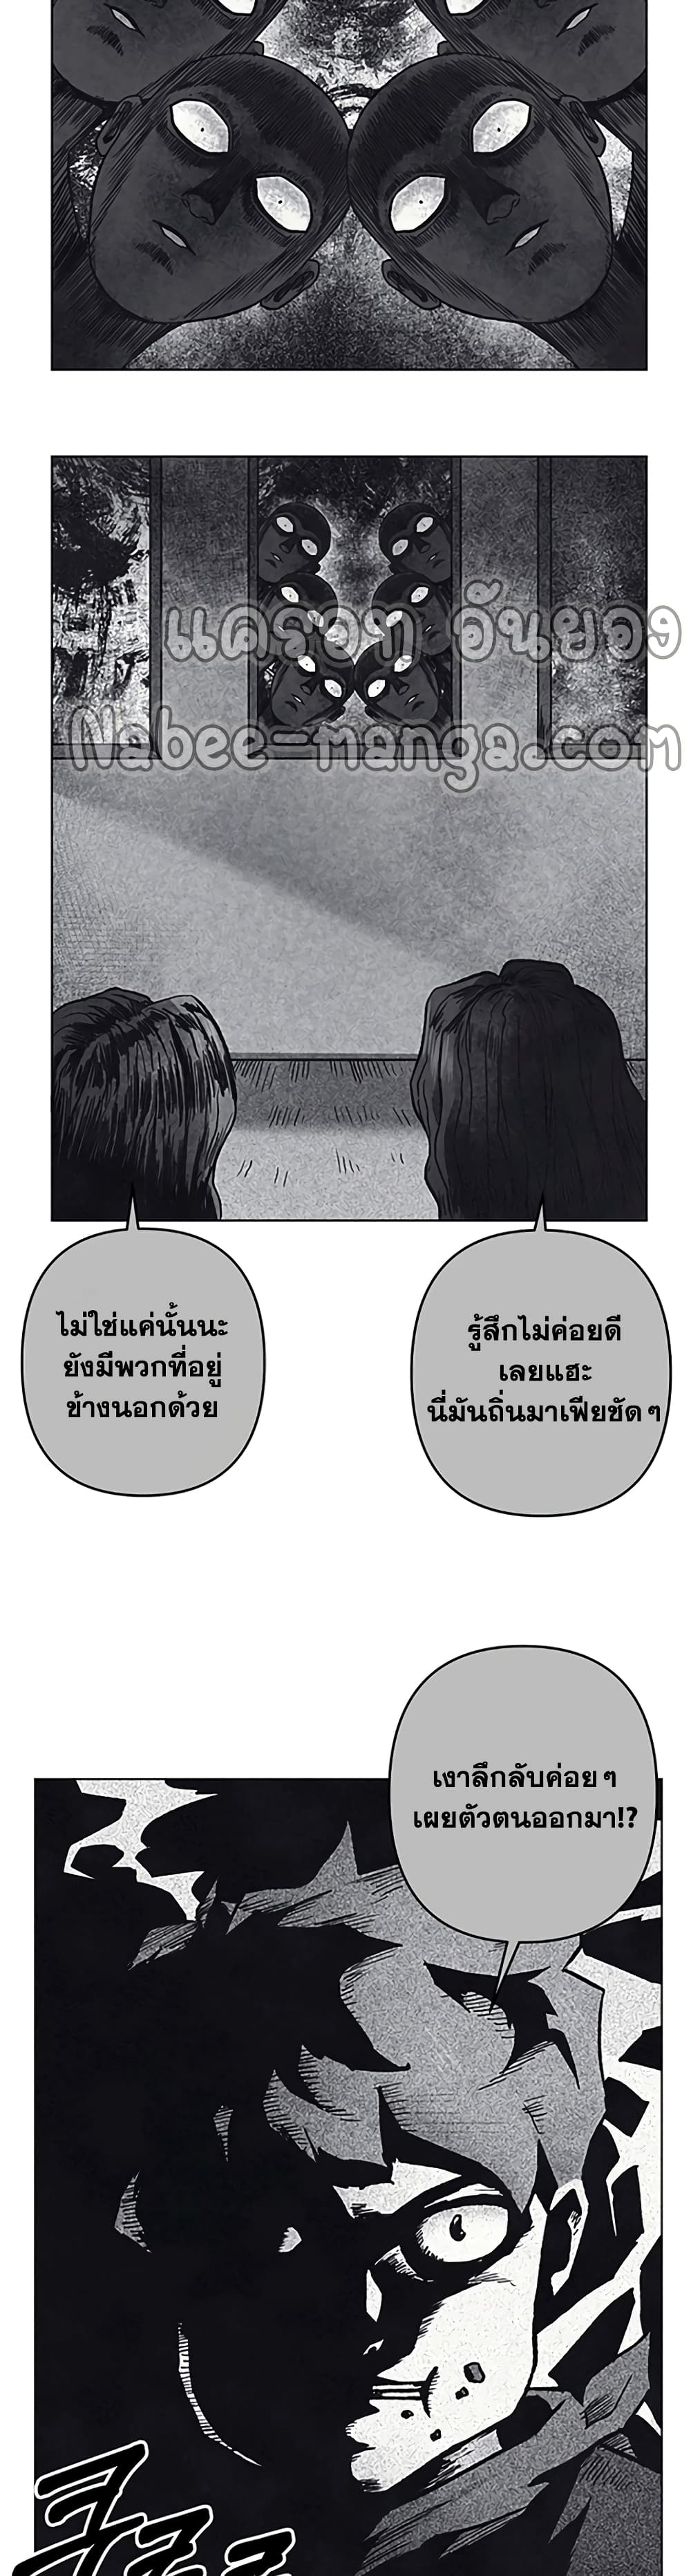 Surviving in an Action Manhwa21 (19)